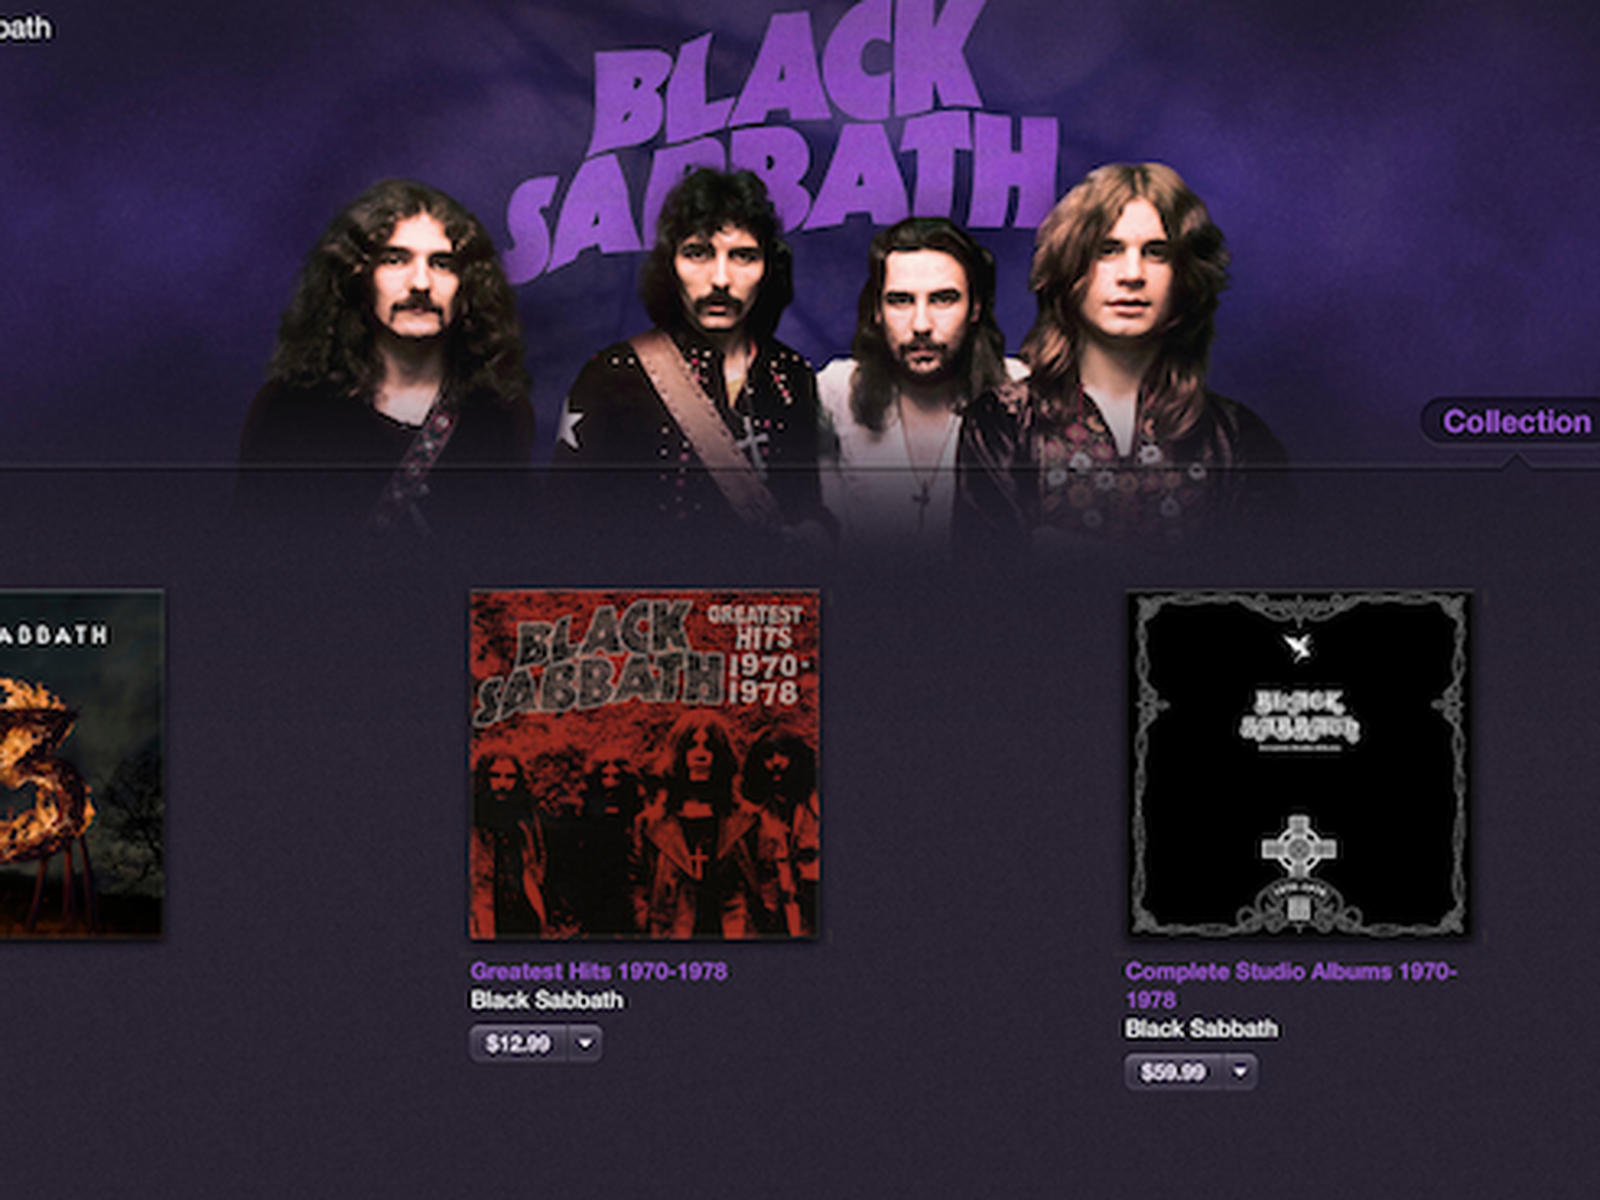 Black Sabbath's 1970s Albums Come to iTunes With Limited Exclusivity -  MacRumors